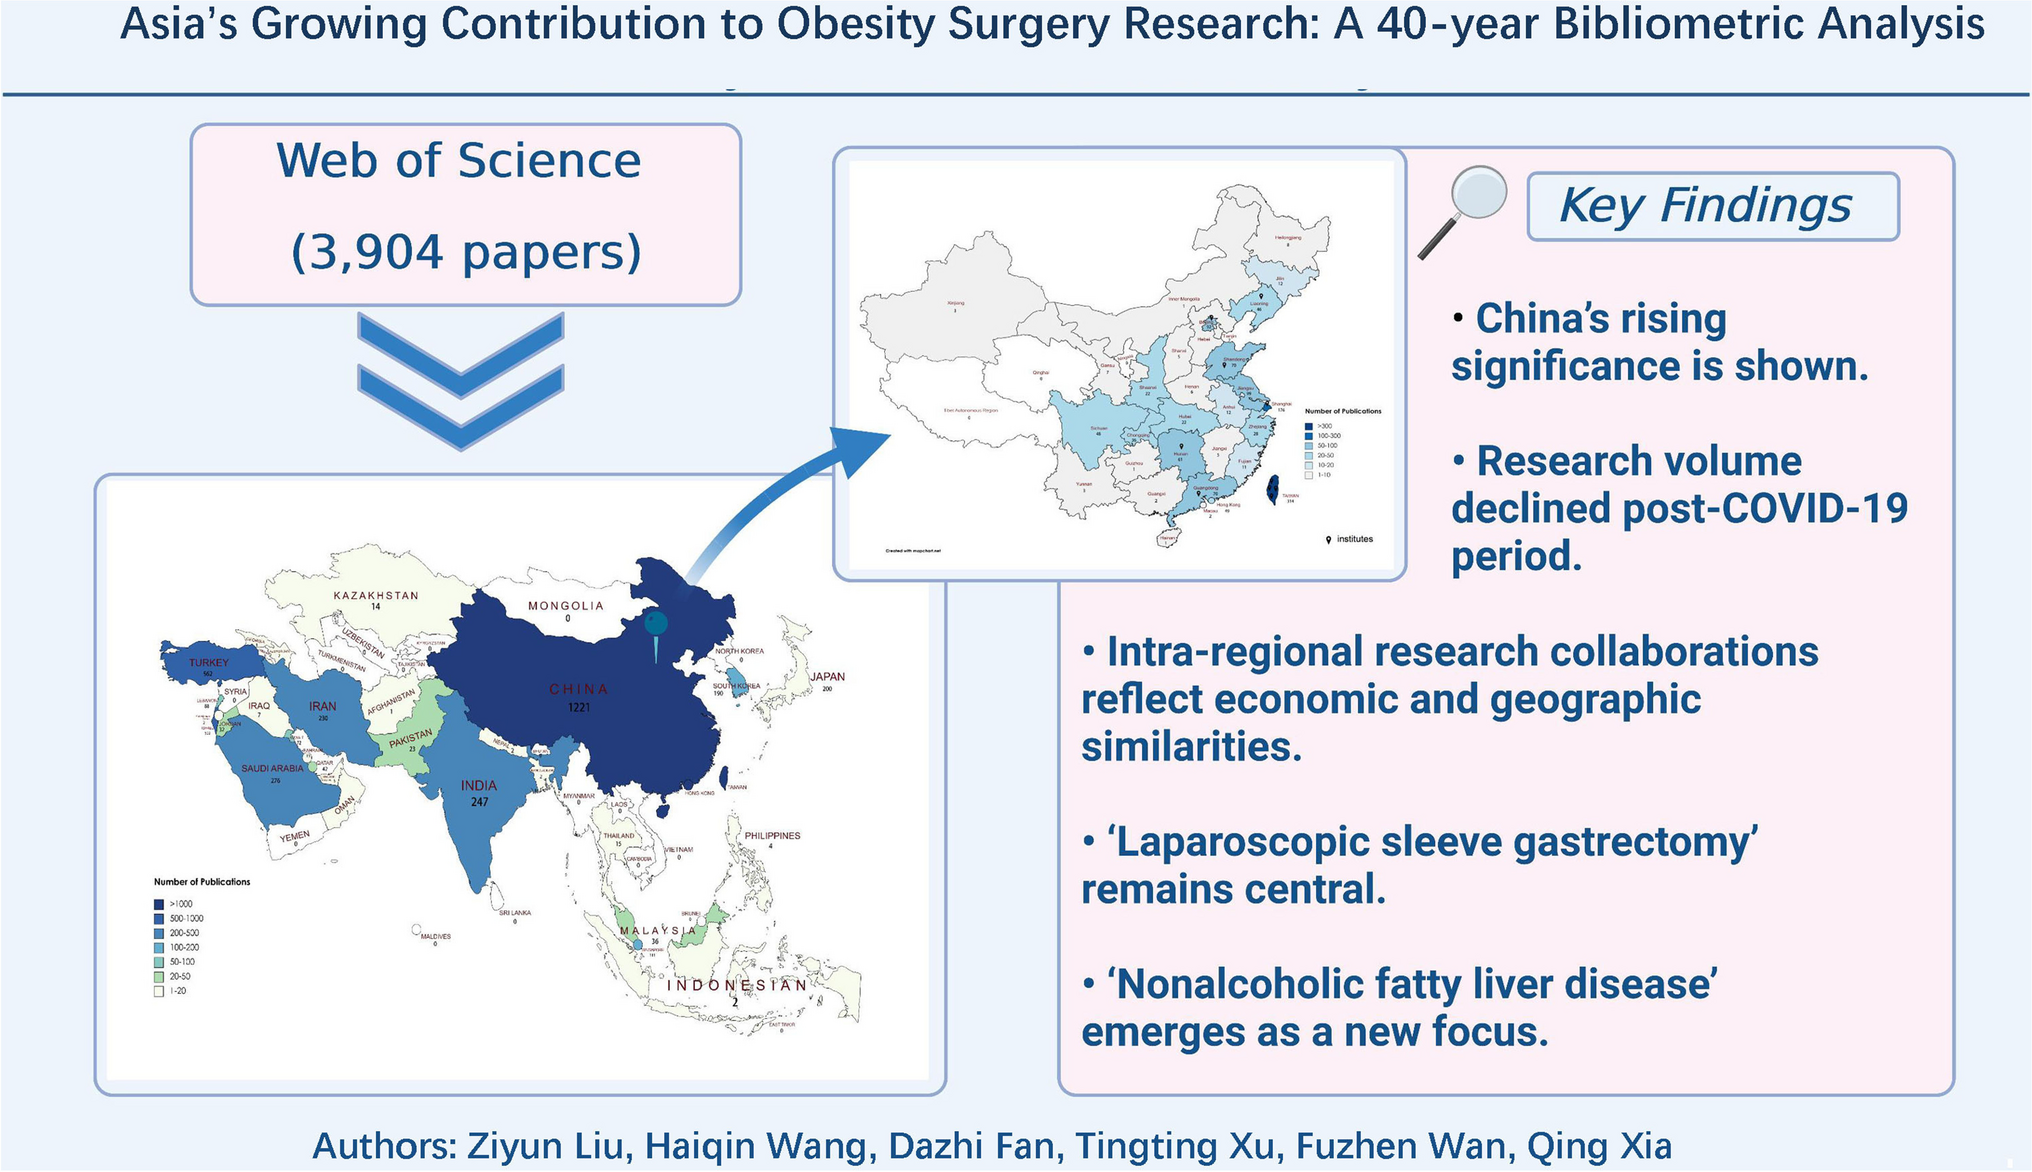 Asia’s Growing Contribution to Obesity Surgery Research: A 40-year Bibliometric Analysis